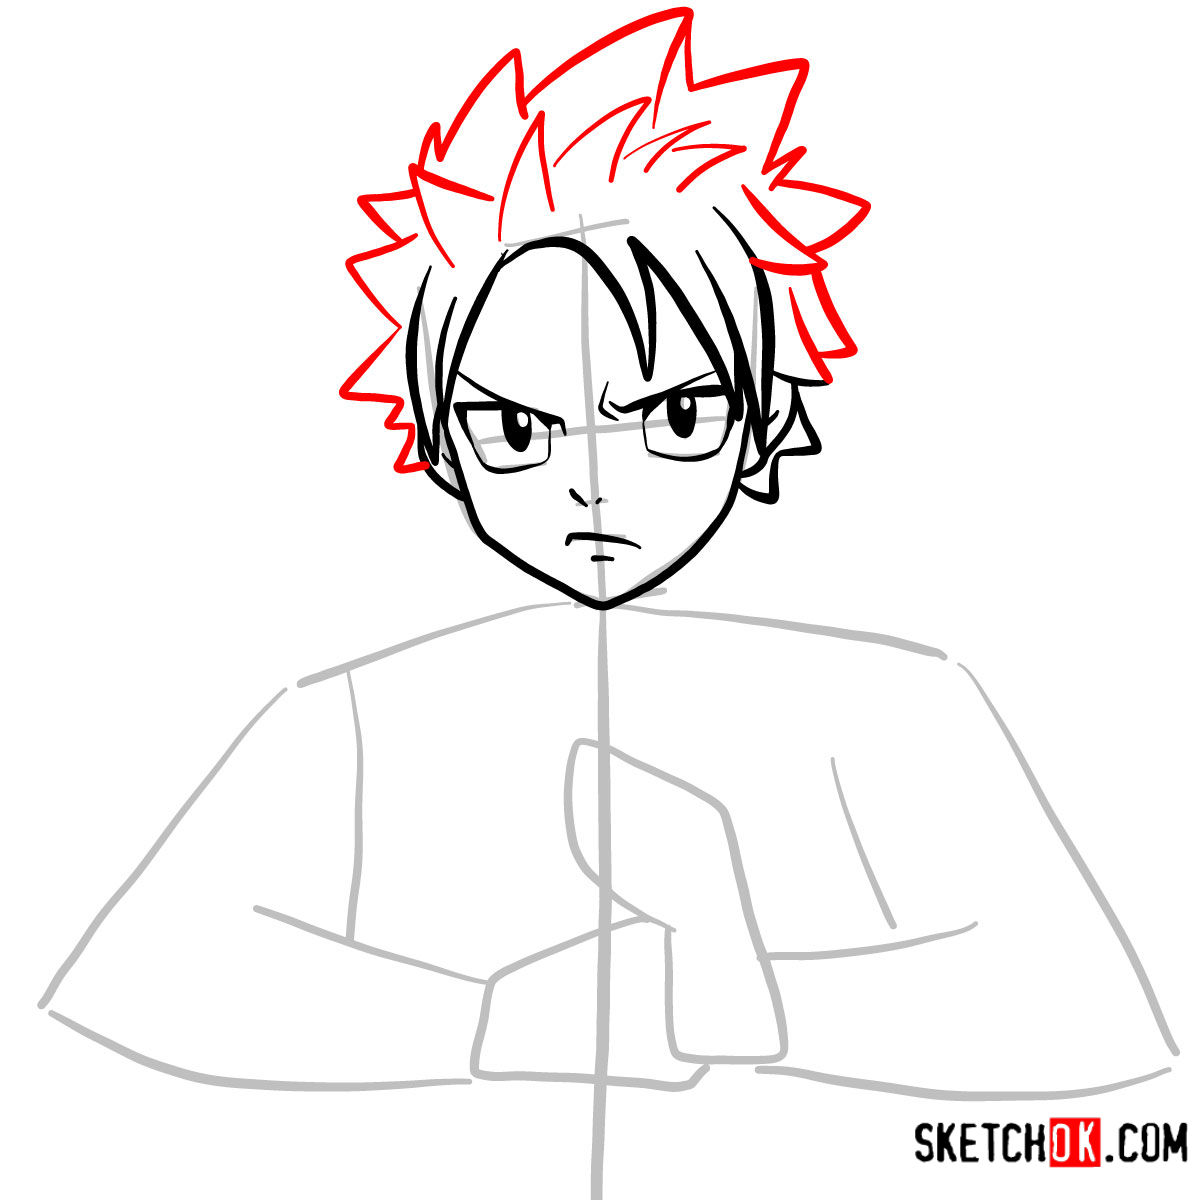 How to draw Natsu Dragneel's face | Fairy Tail - step 05